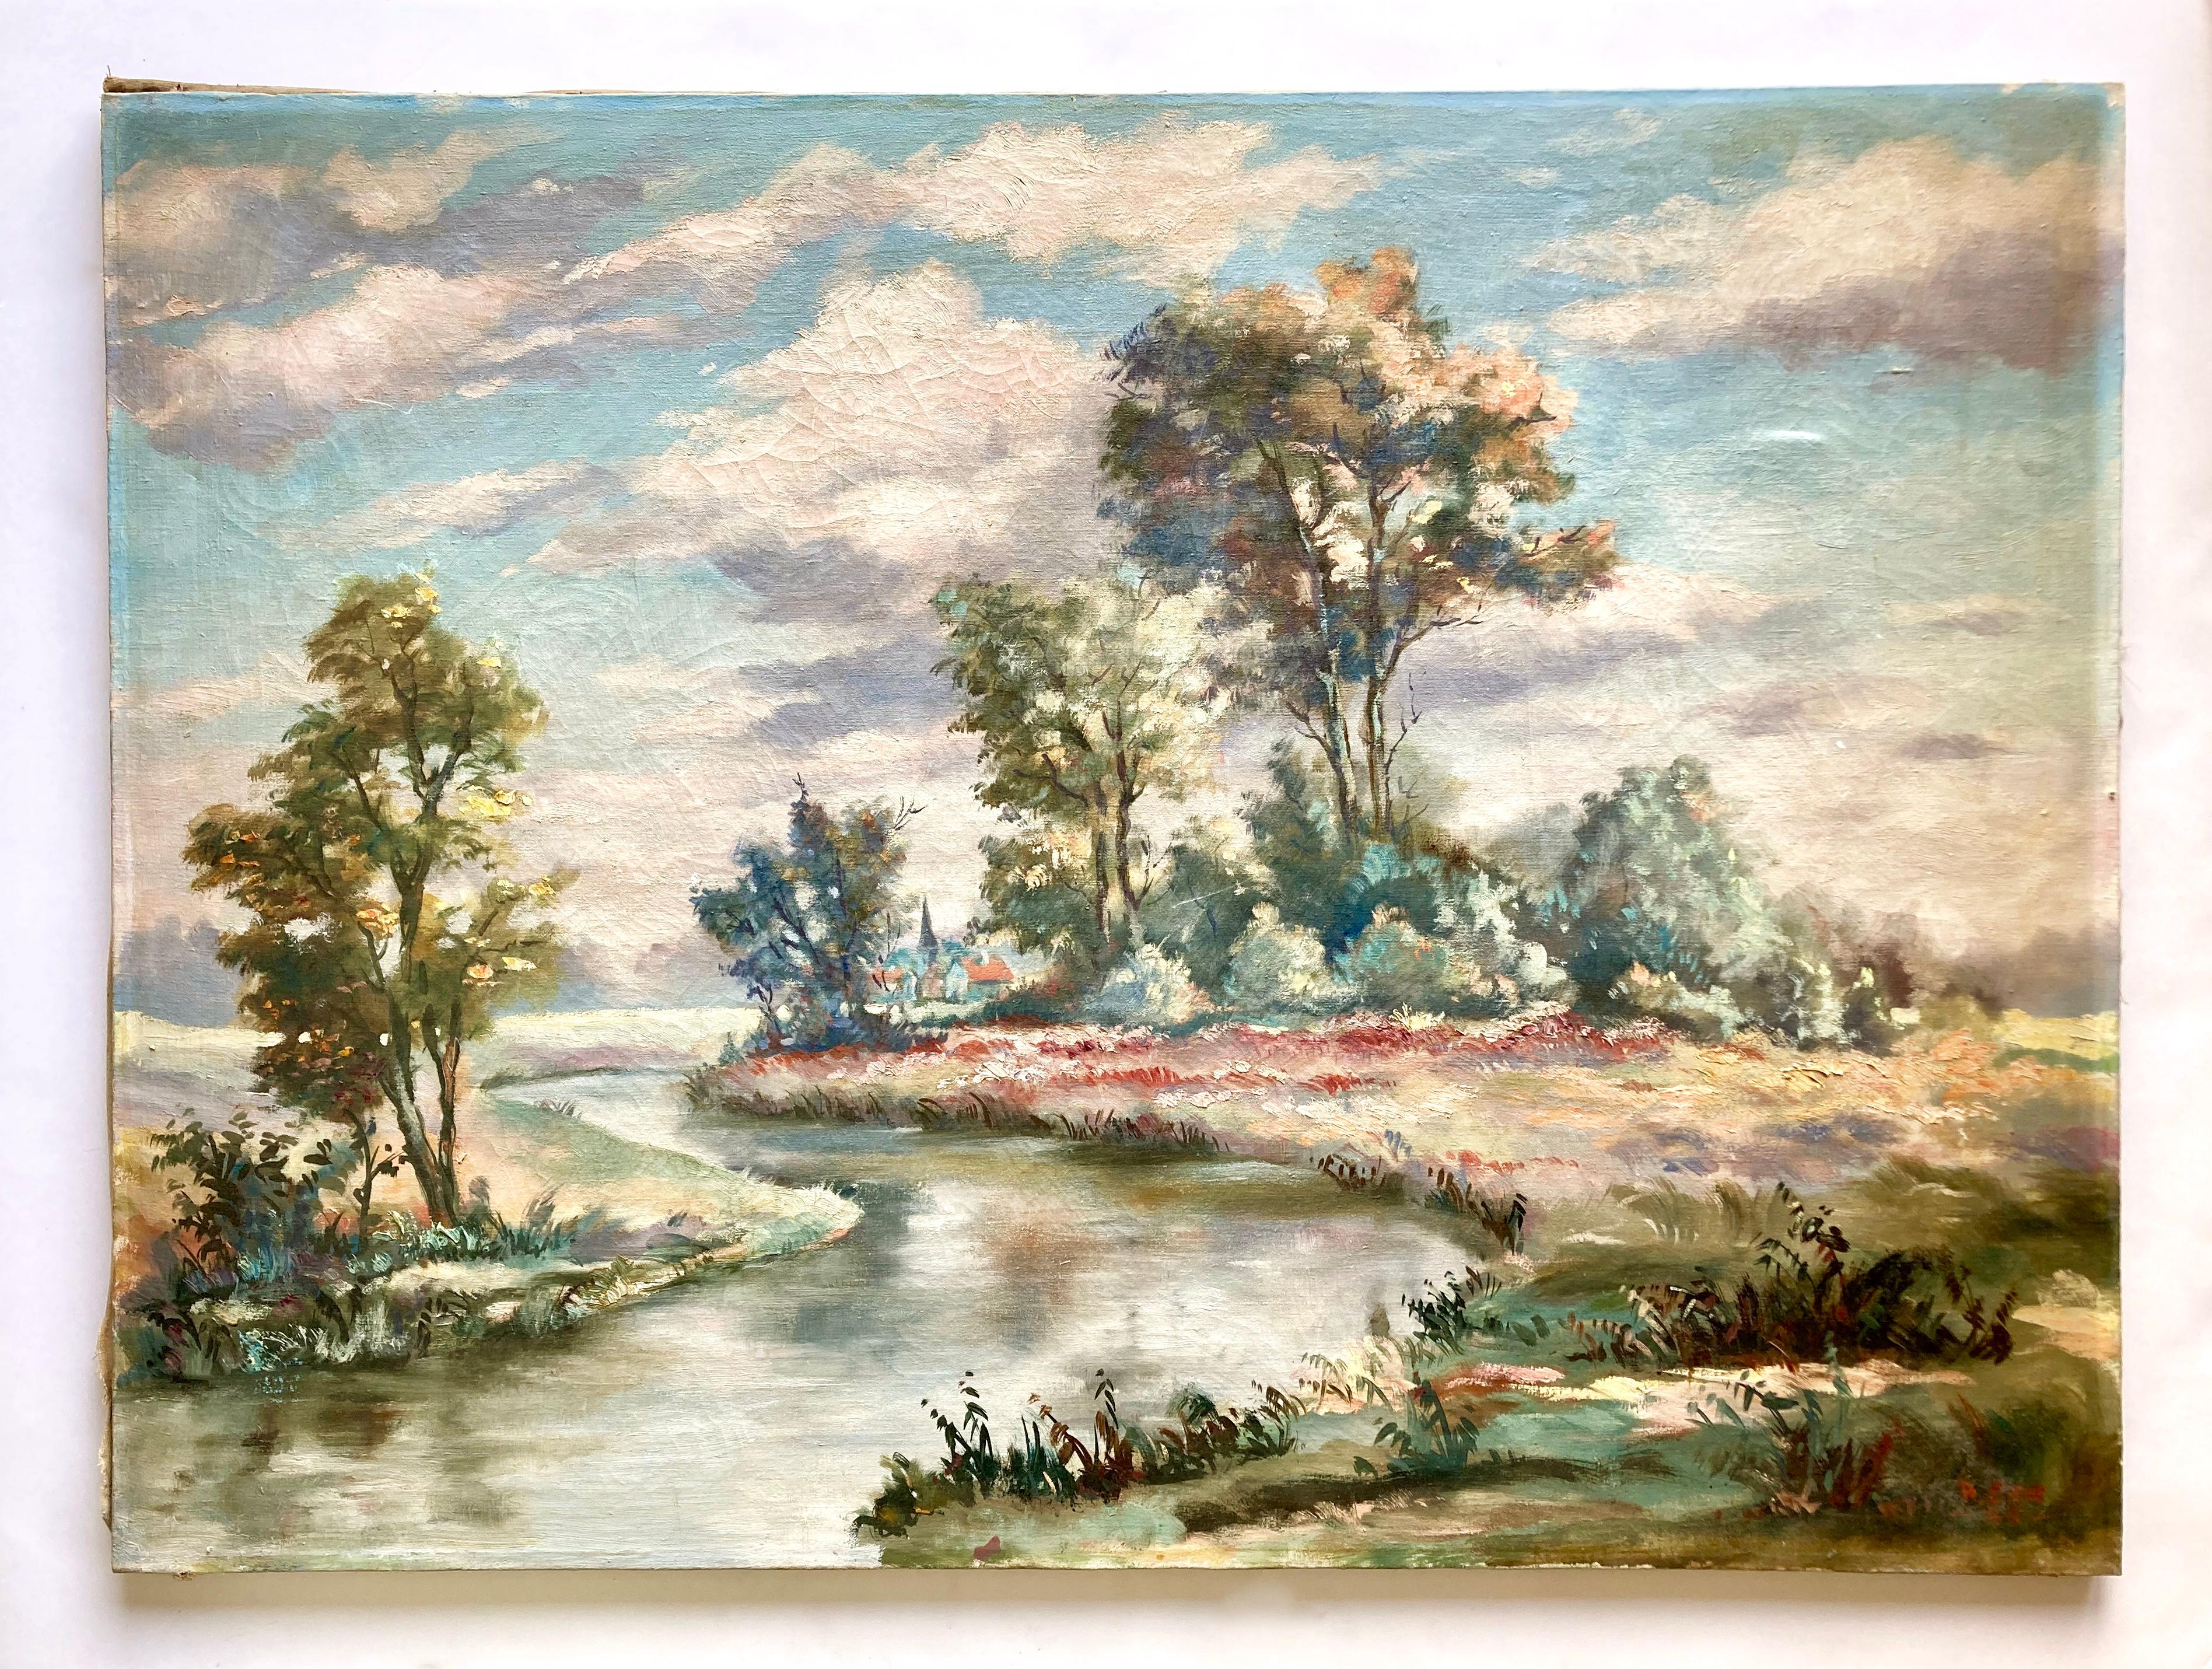 A large, romantic landscape in soft pastel colors. This original oil painting on stretched canvas is signed and dated 1955 by the French artist A. Erb (1911-2005), see lower right corner. 

Alfred Erb was born April 6, 1911 in the town of